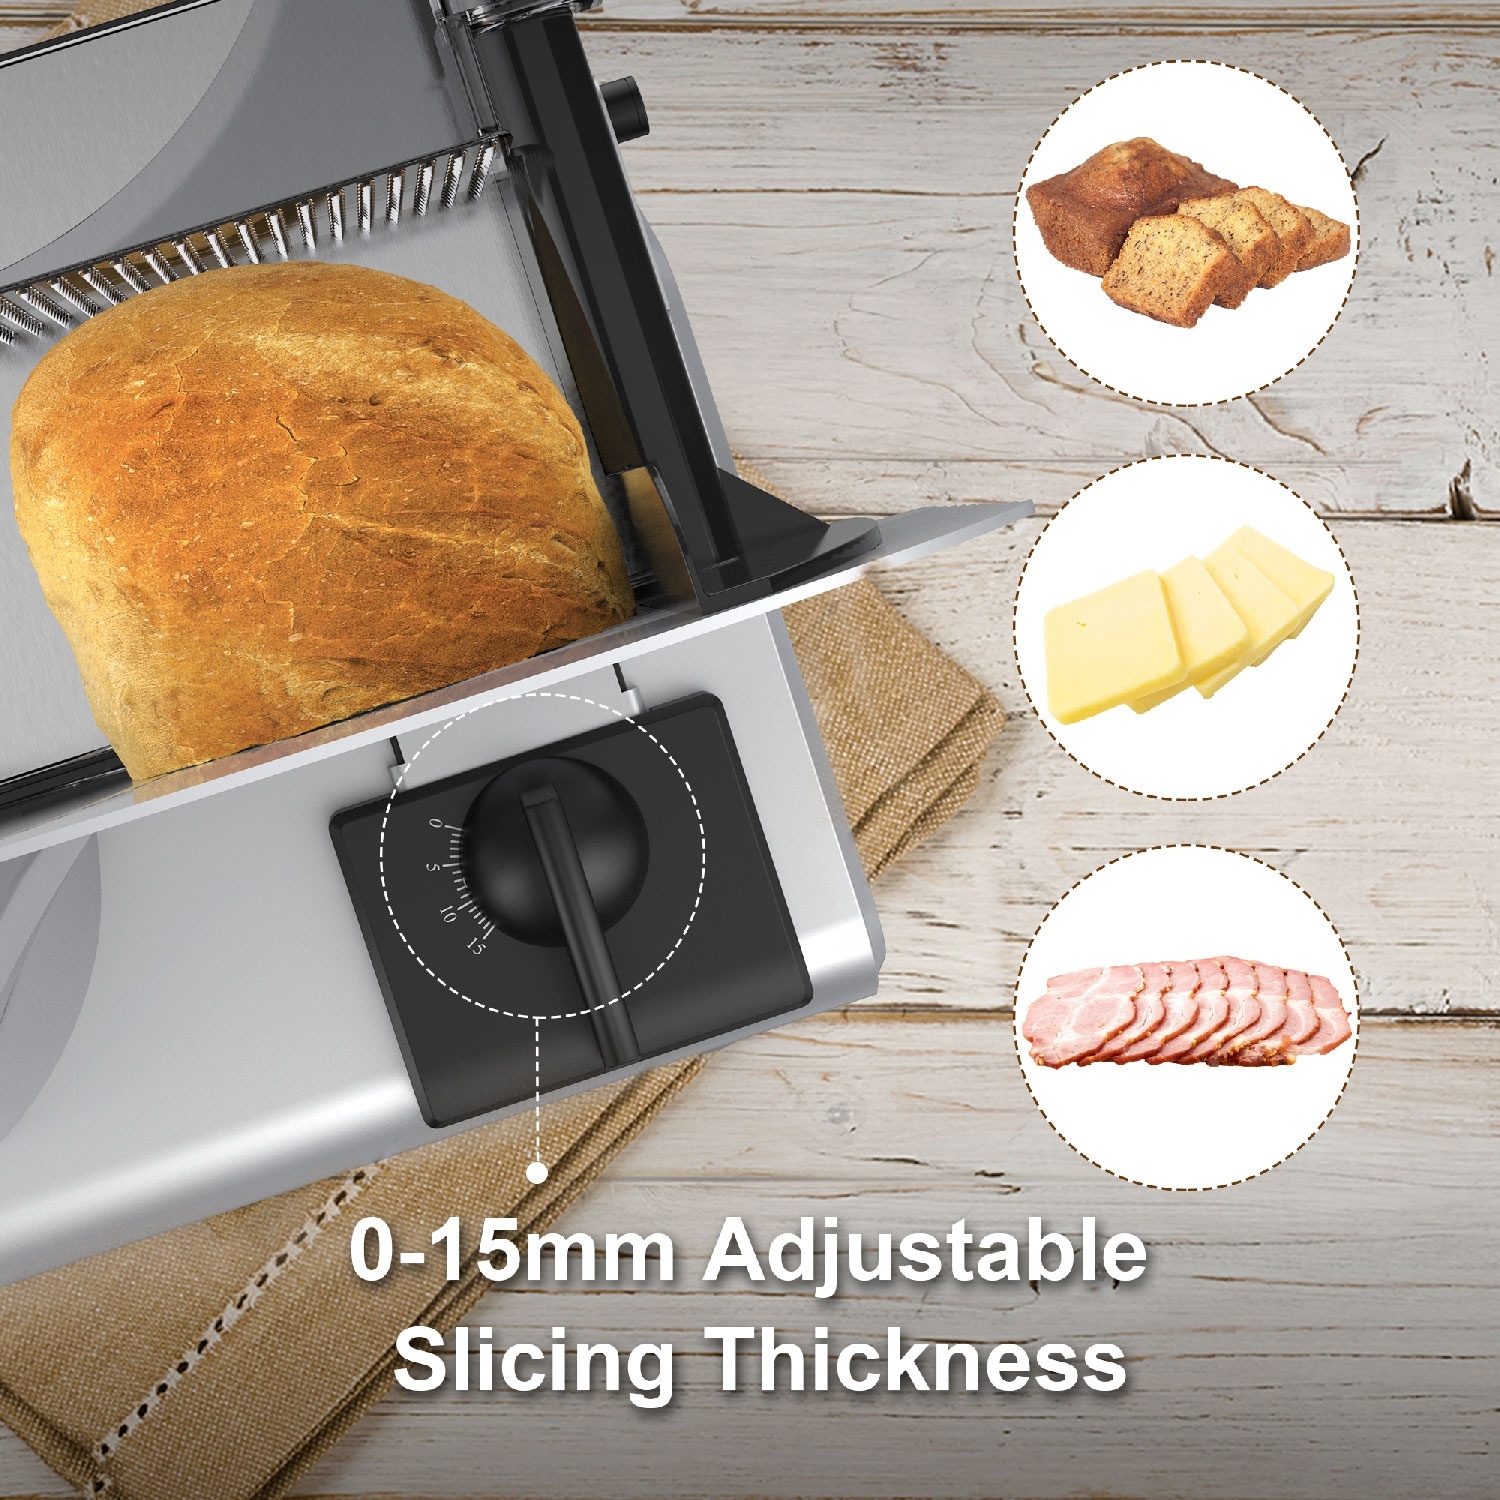 https://ak1.ostkcdn.com/images/products/is/images/direct/6380d5677df2ace39a193d029848f0b8ebead3d2/Mliter-Electric-Food-Slicer-Precision-7.5-Inch-Stainless-Steel-Blade-For-Bread-and-Meat%2C-150-Watt.jpg